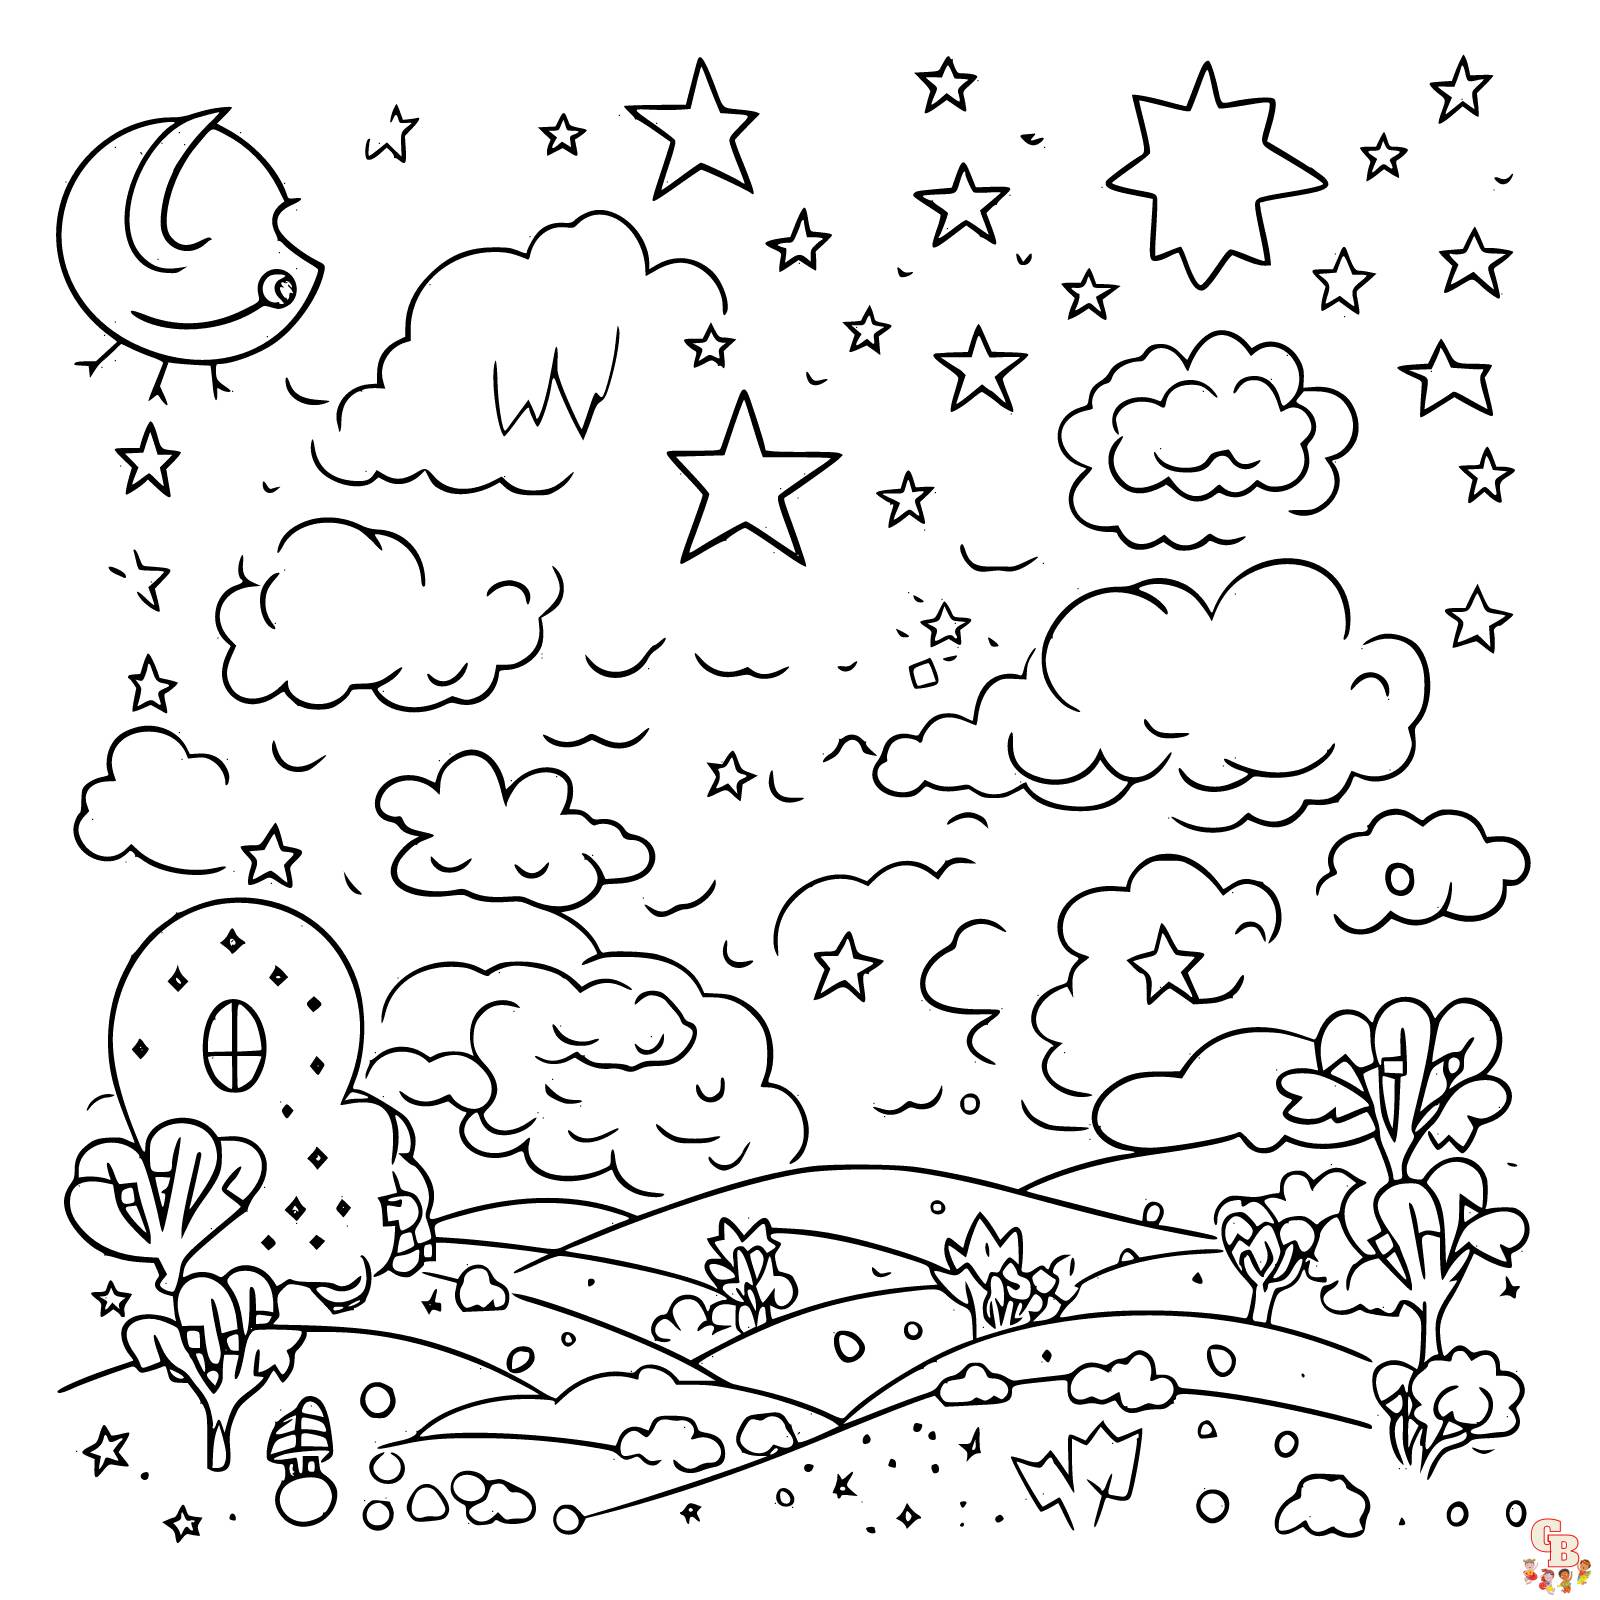 Printable night sky coloring pages free for kids and adults